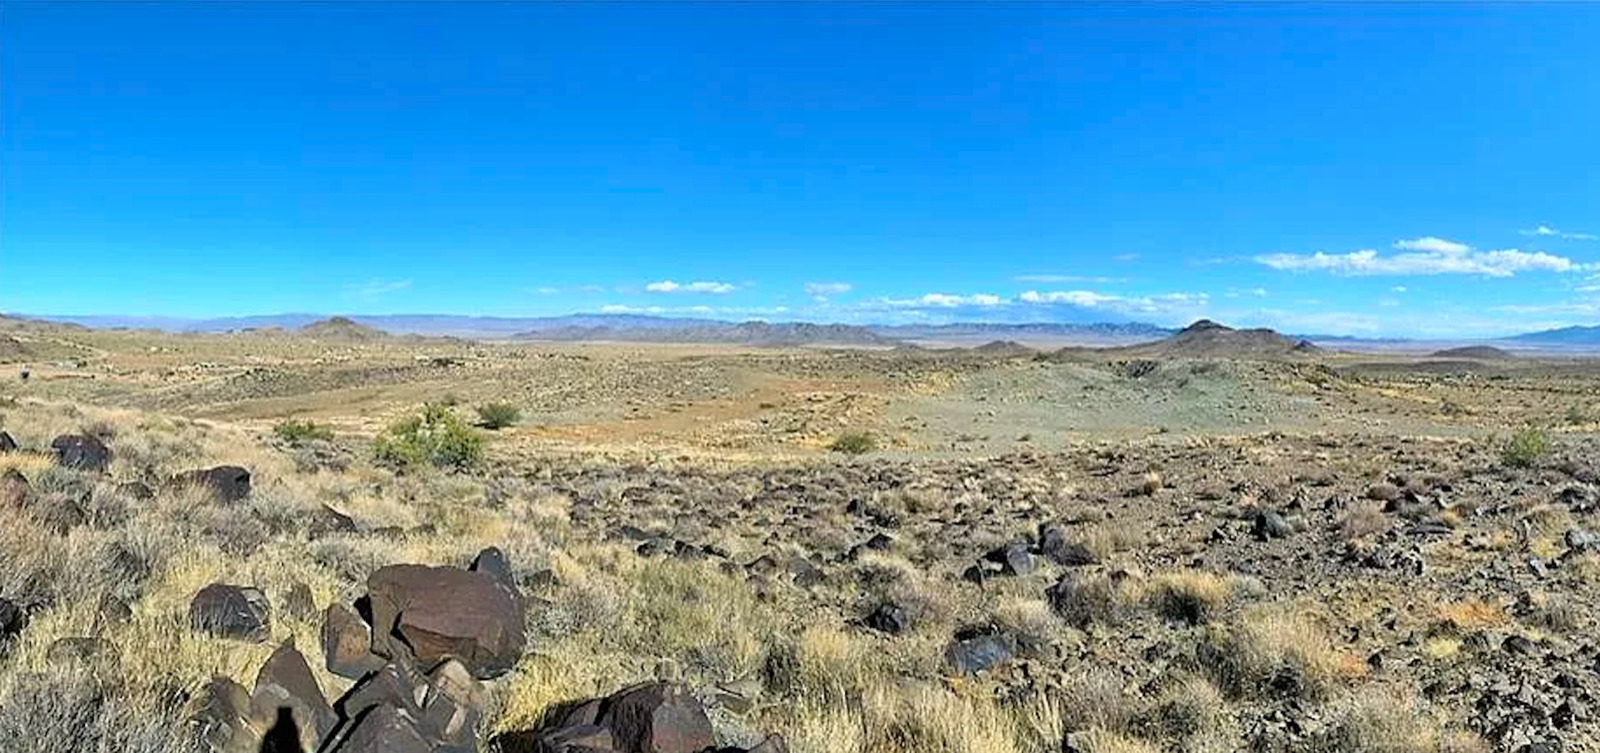 Ultra Rare 40 Acre Ranch In Nw Arizona! Remote! Quiet! Easy Access! Mountains!